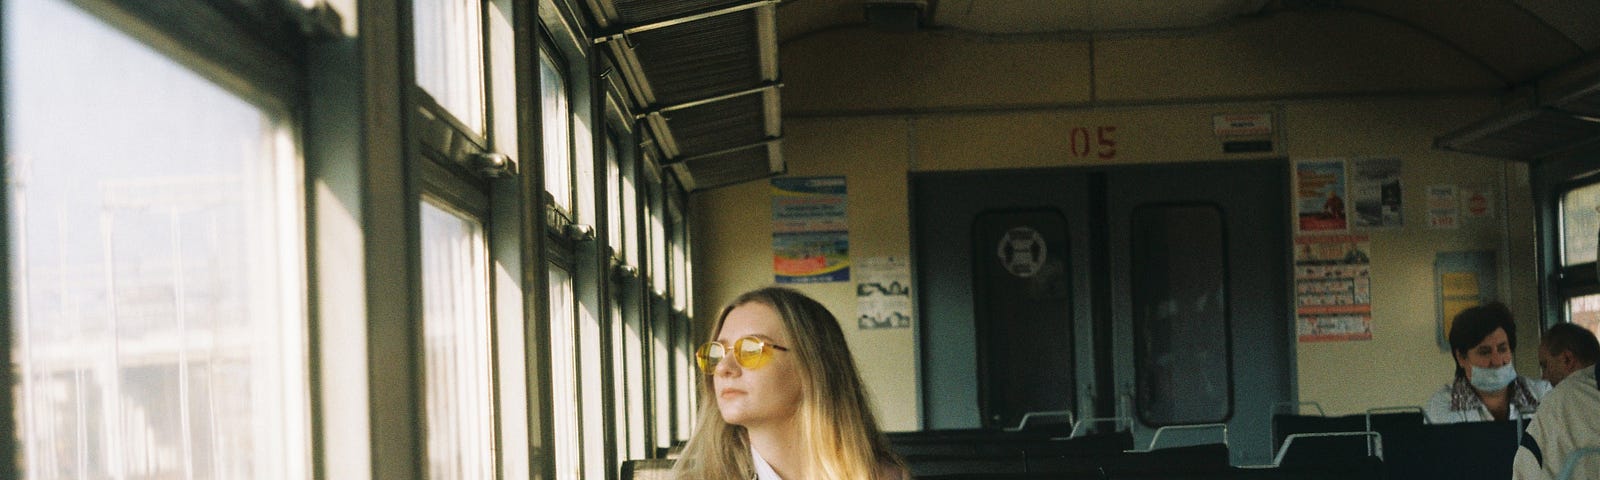 A lady in glasses, sitting in the window seat of a train, and sun is shining on her